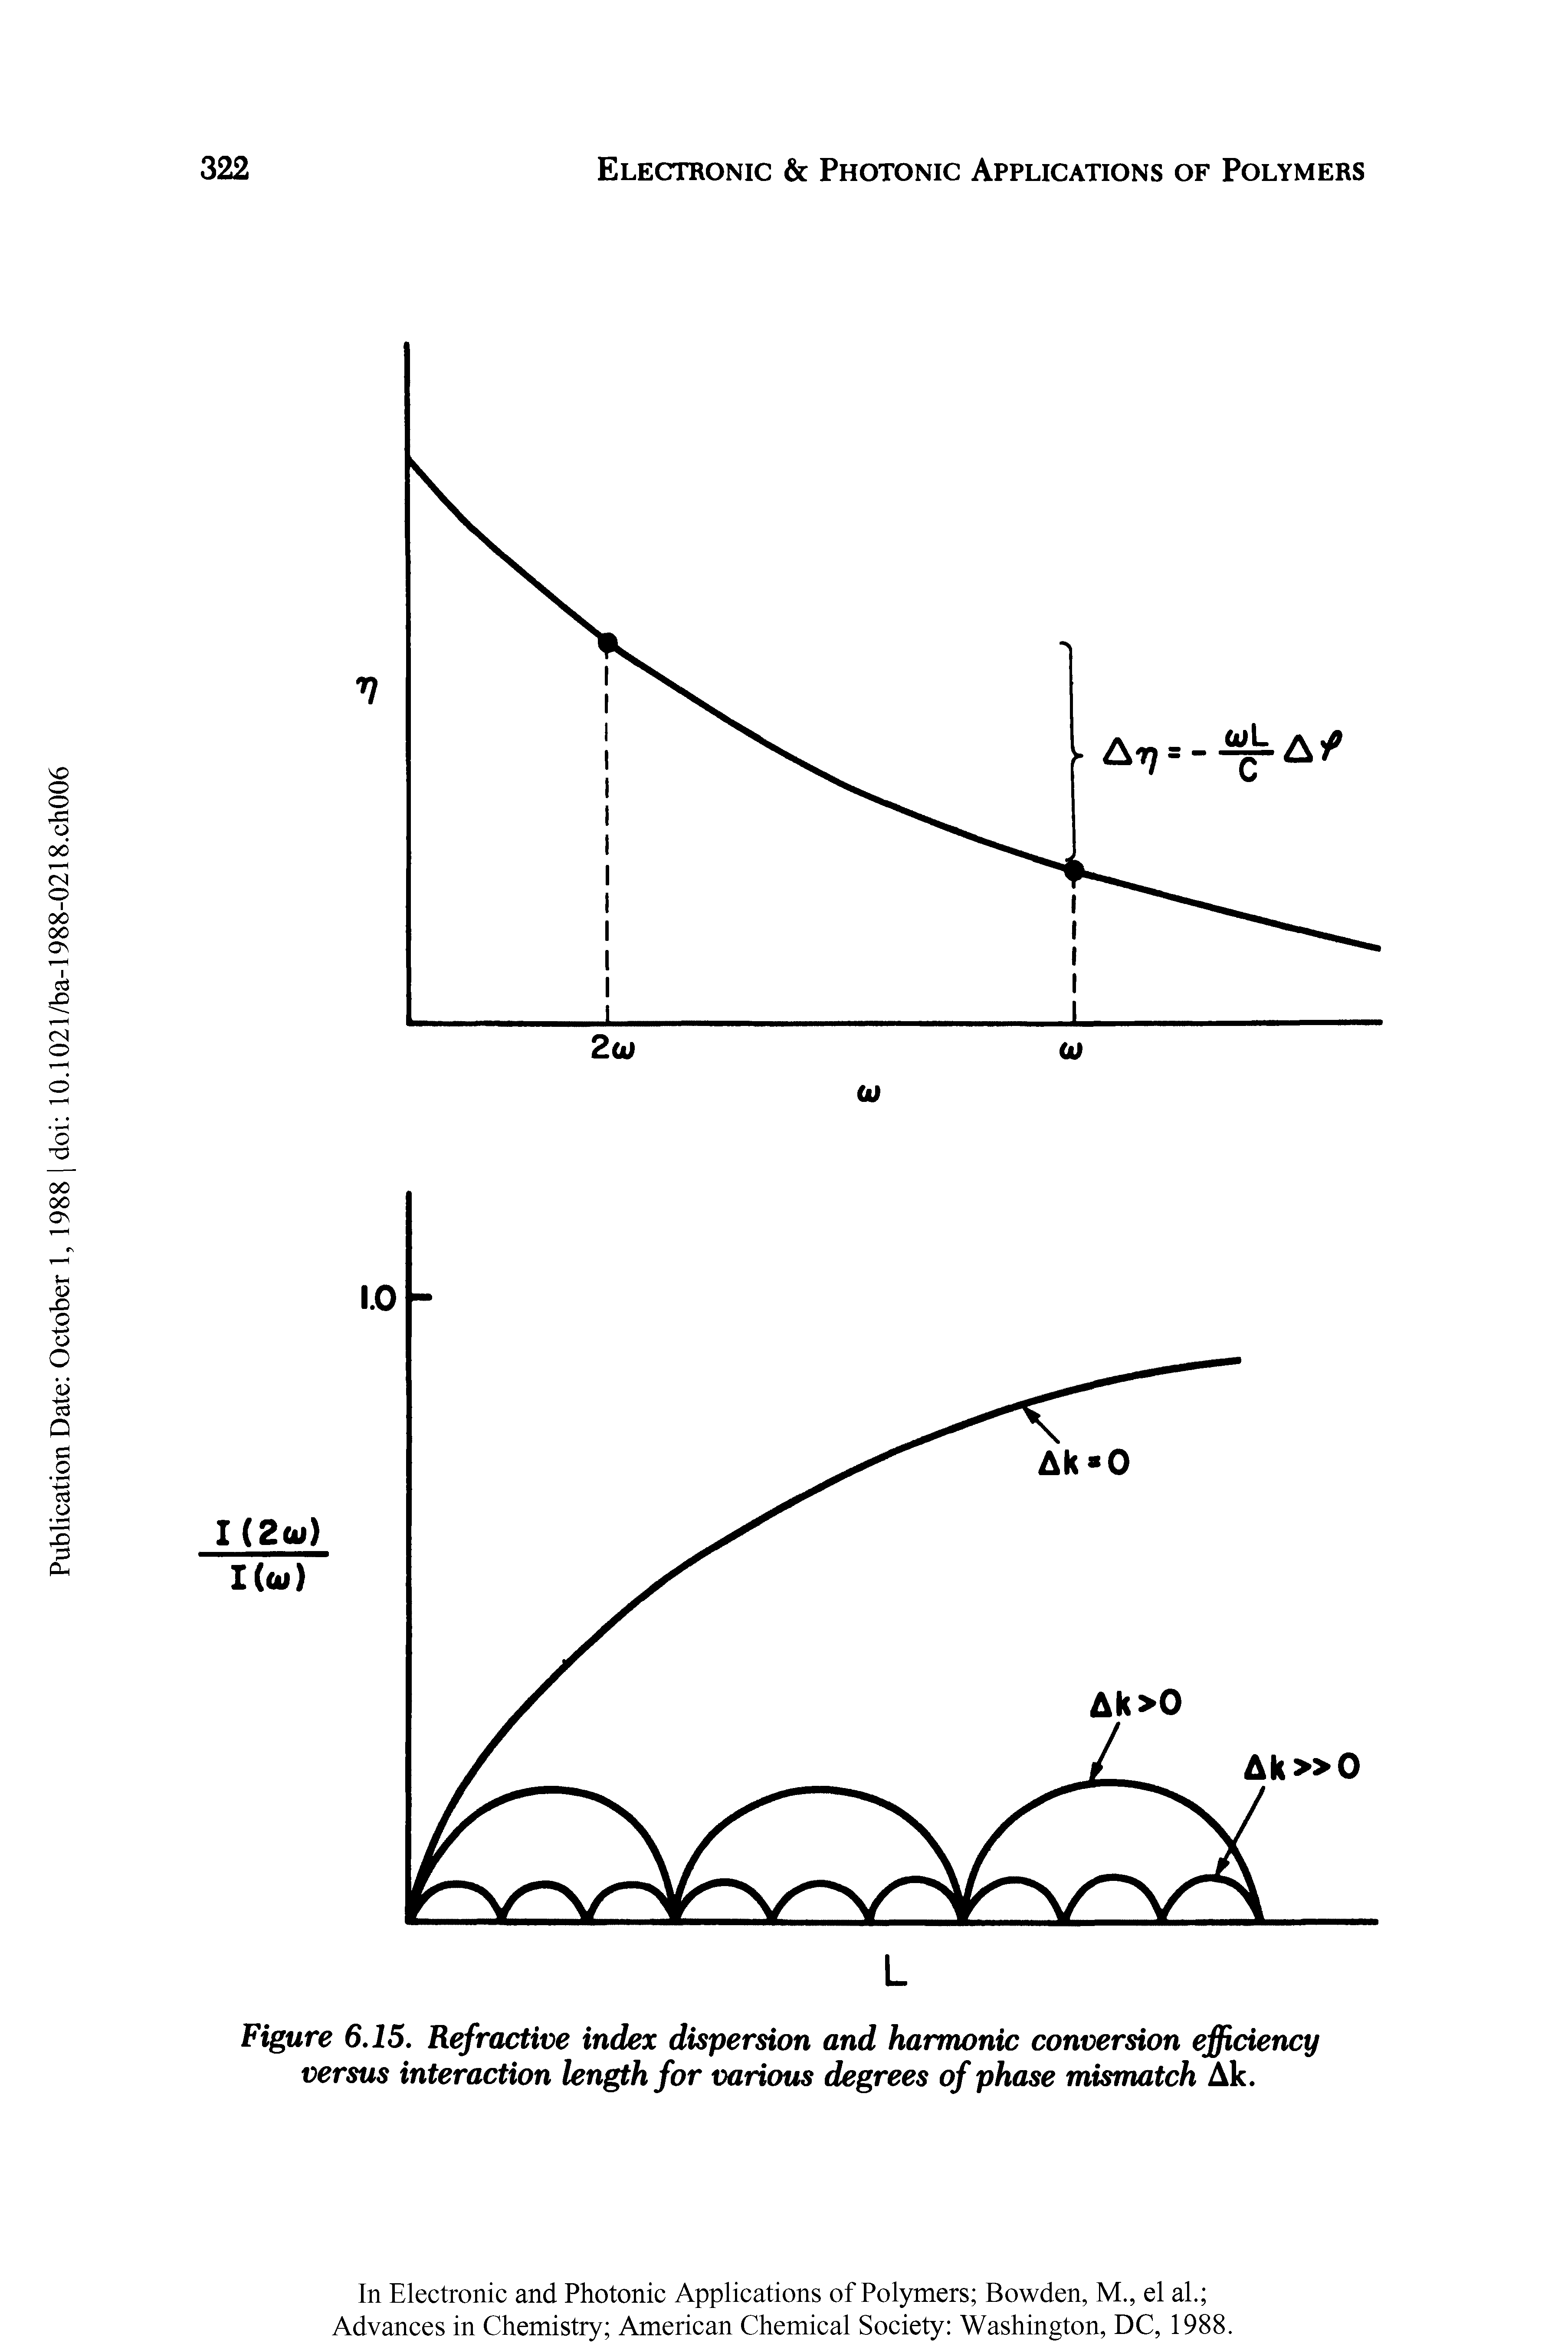 Figure 6.15. Refractive index dispersion and harmonic conversion efficiency versus interaction kngthfor various degrees of phase mismatch Ak.